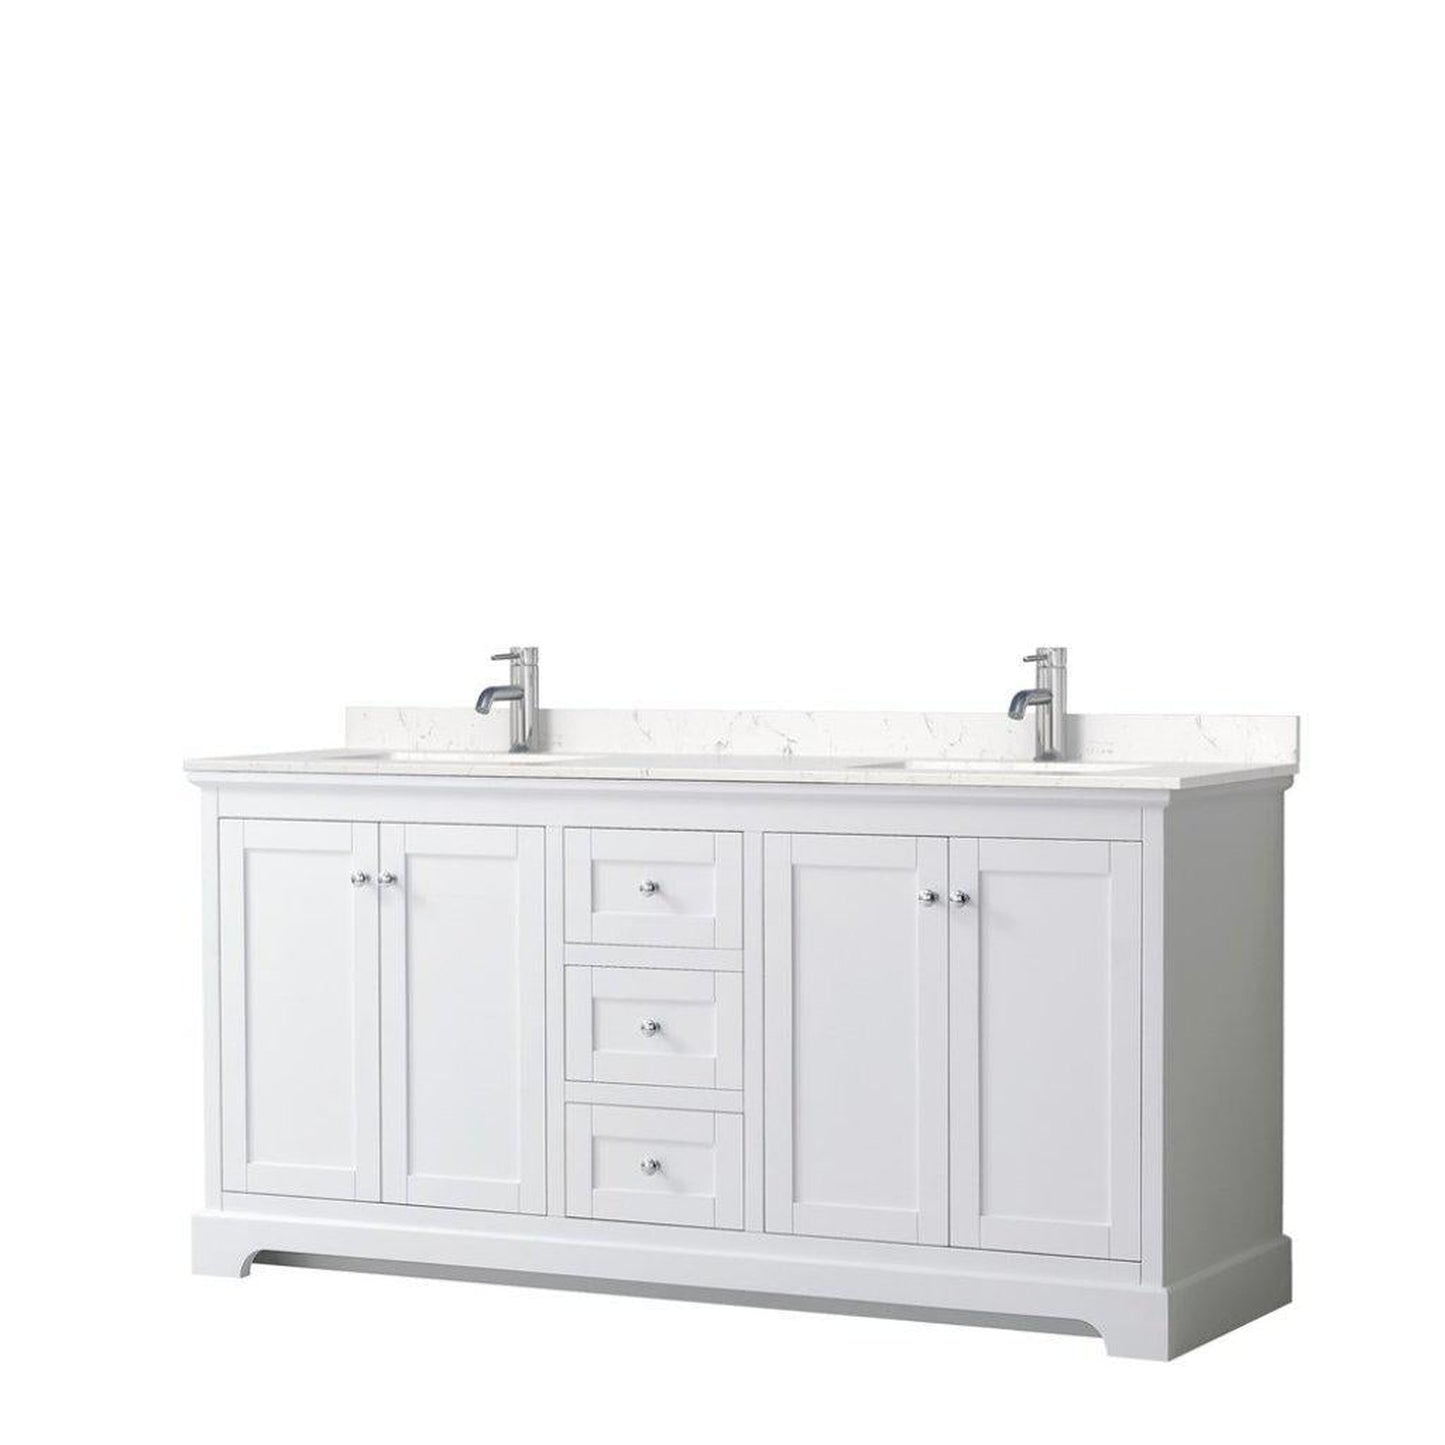 Wyndham Collection Avery 72" White Double Bathroom Vanity, Light-Vein Carrara Cultured Marble Countertop With 1-Hole Faucet, Square Sink, Polished Chrome Trims